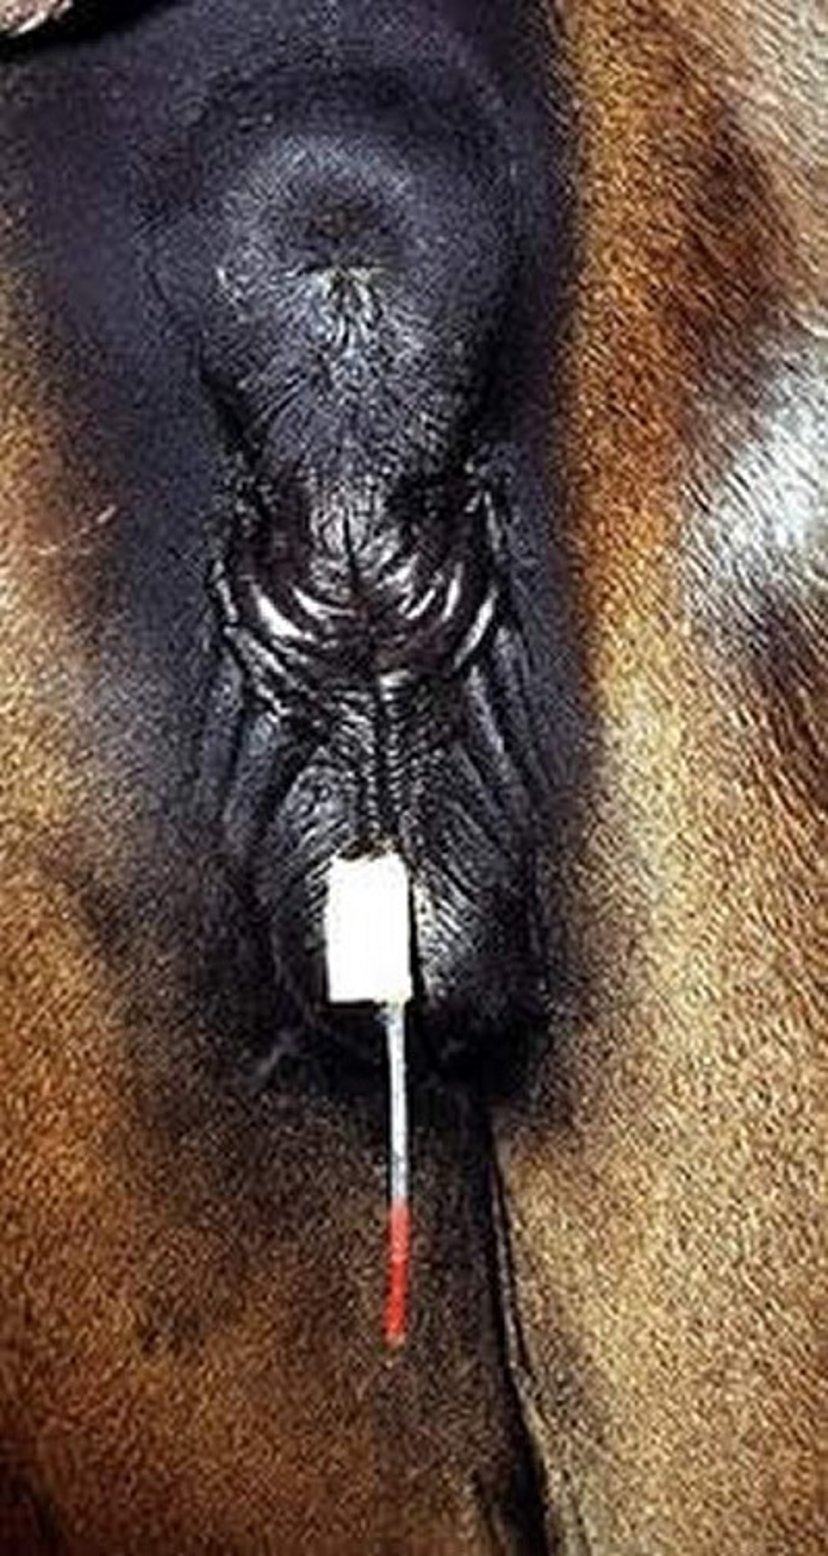 Indwelling catheter for intrauterine treatment, horse